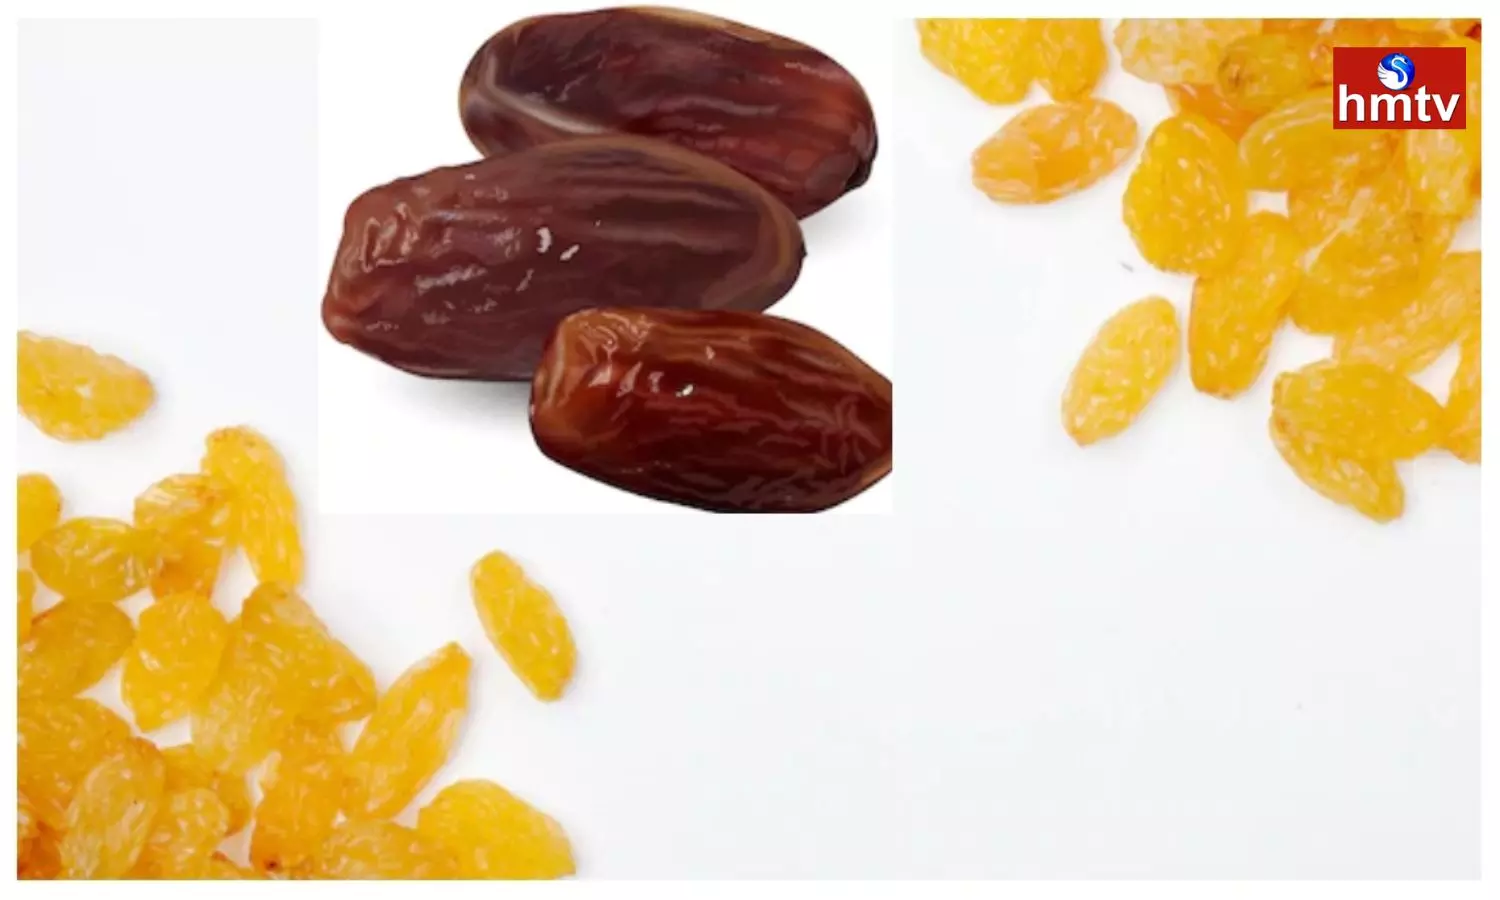 Do You Eat a lot of Raisins and Dates in Winter Your Health Will Deteriorate